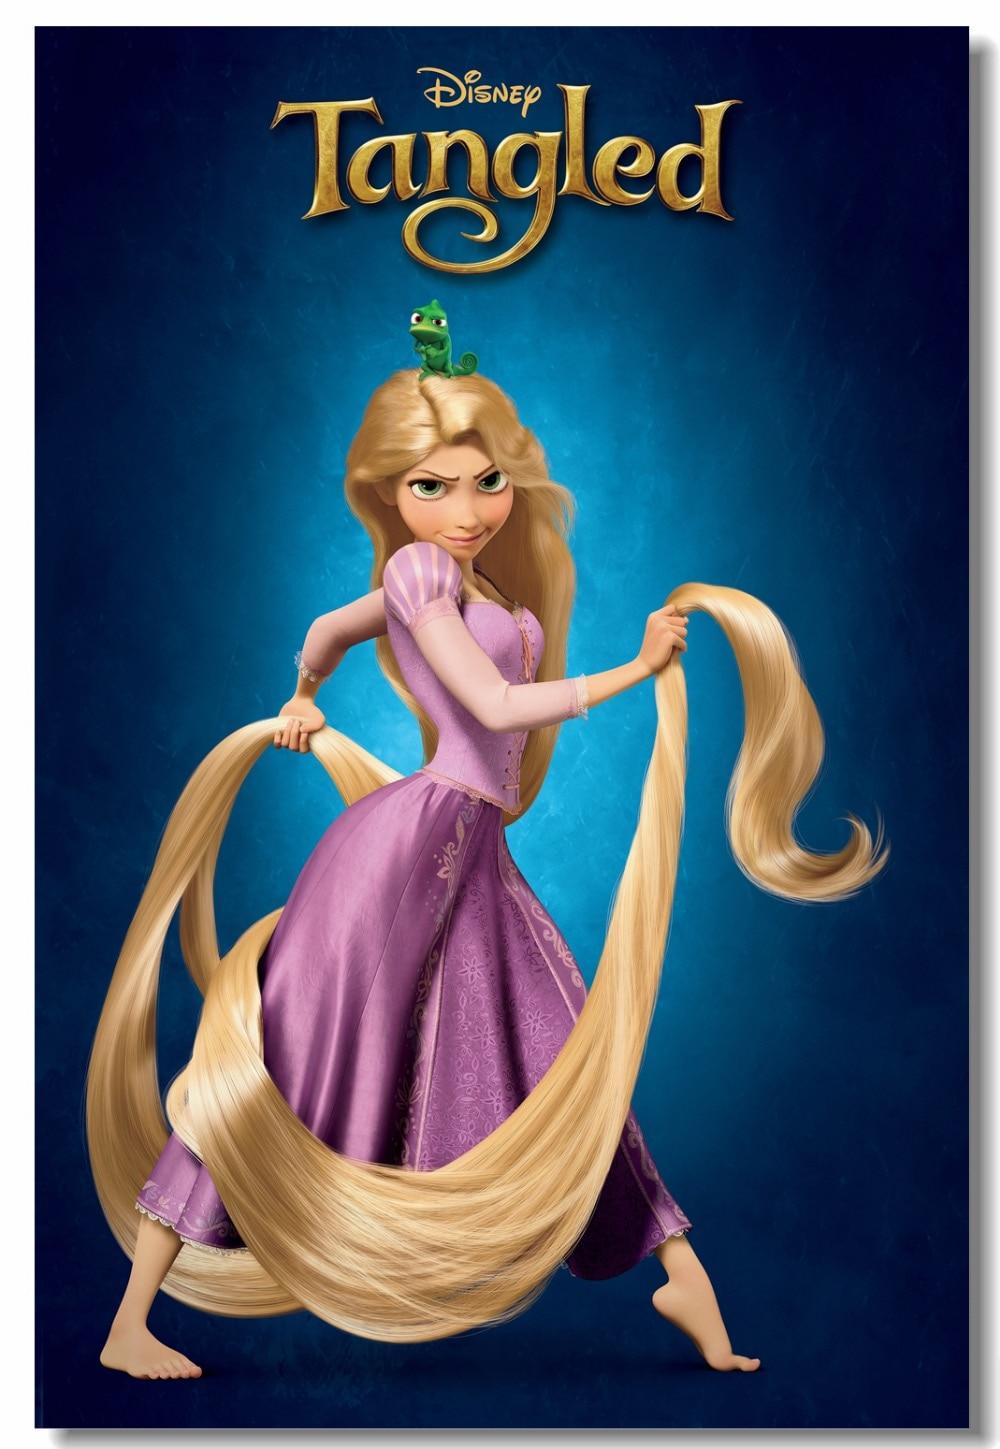 US $5.99 25% OFF. Custom Canvas Wall Decor Tangled Film Poster Tangled Rapunzel Wall Stickers Mural Anime Wallpaper Kids Room Decorations #-in